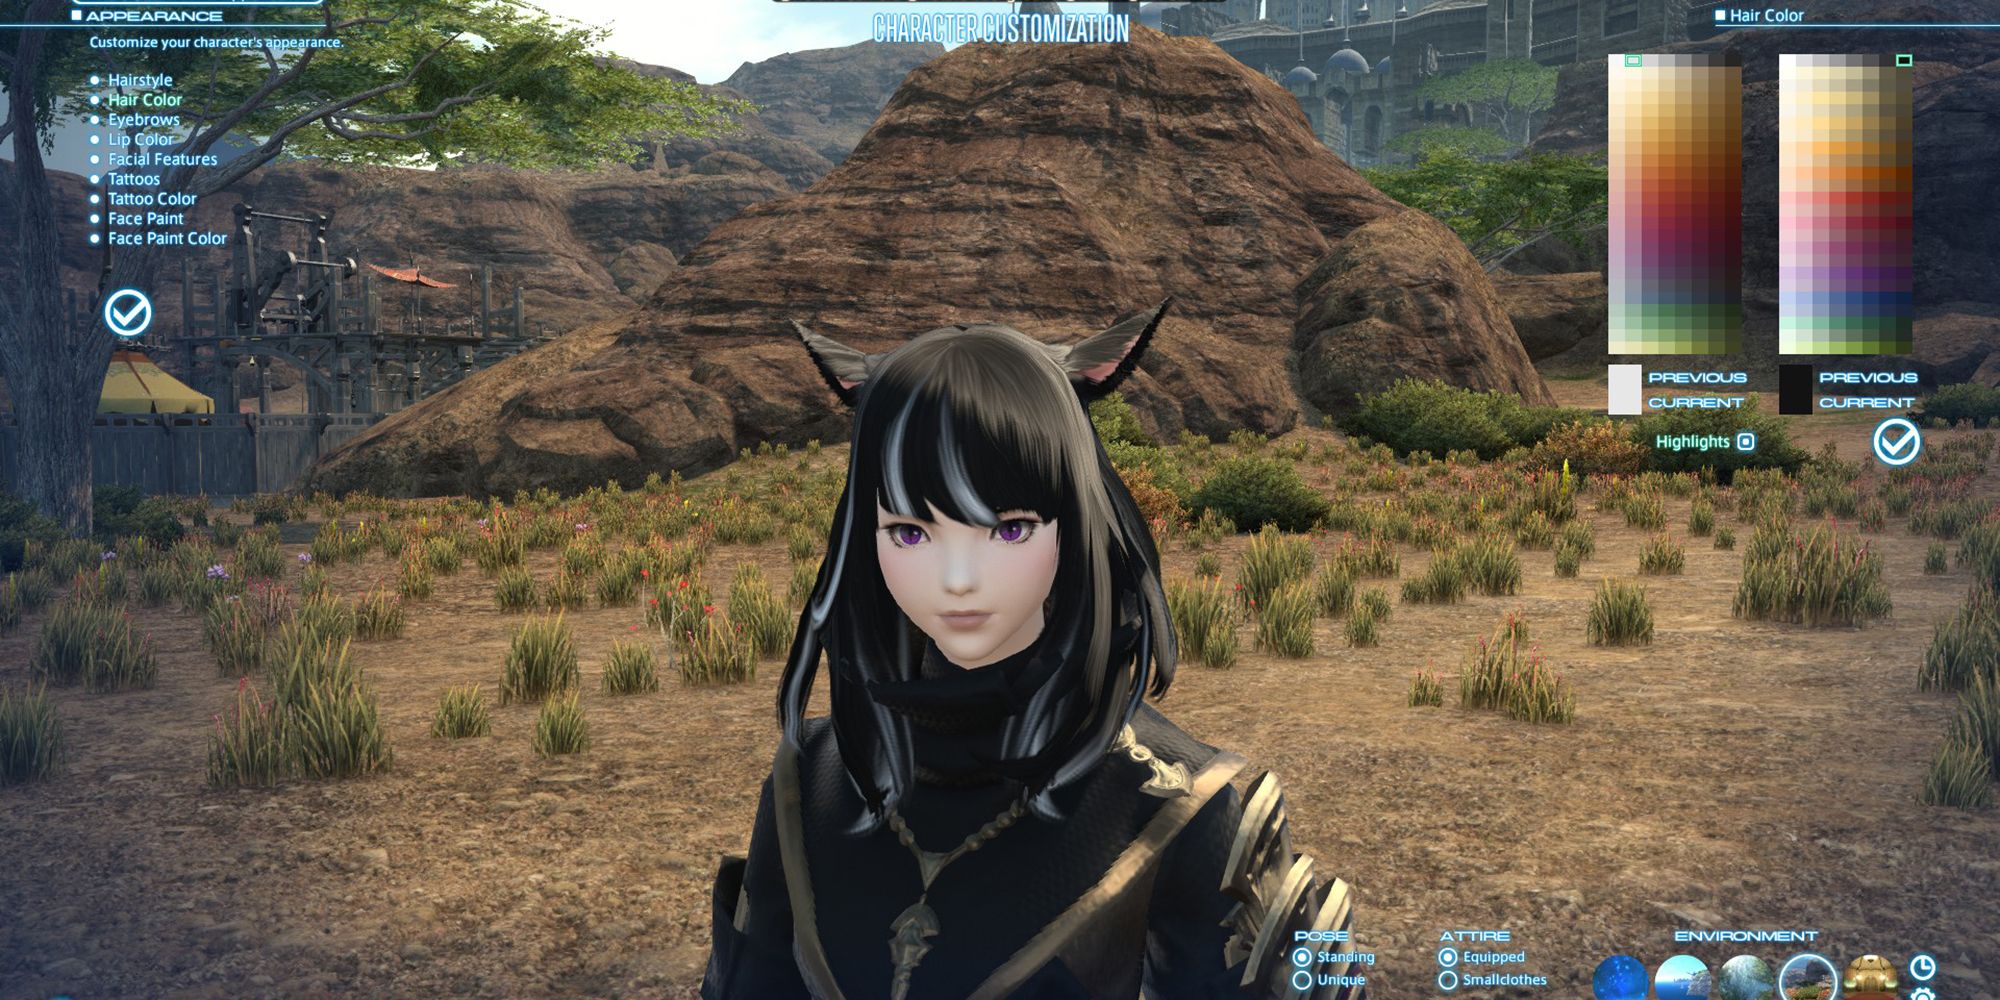 changing character's hair color at the aesthetician in Final Fantasy 14